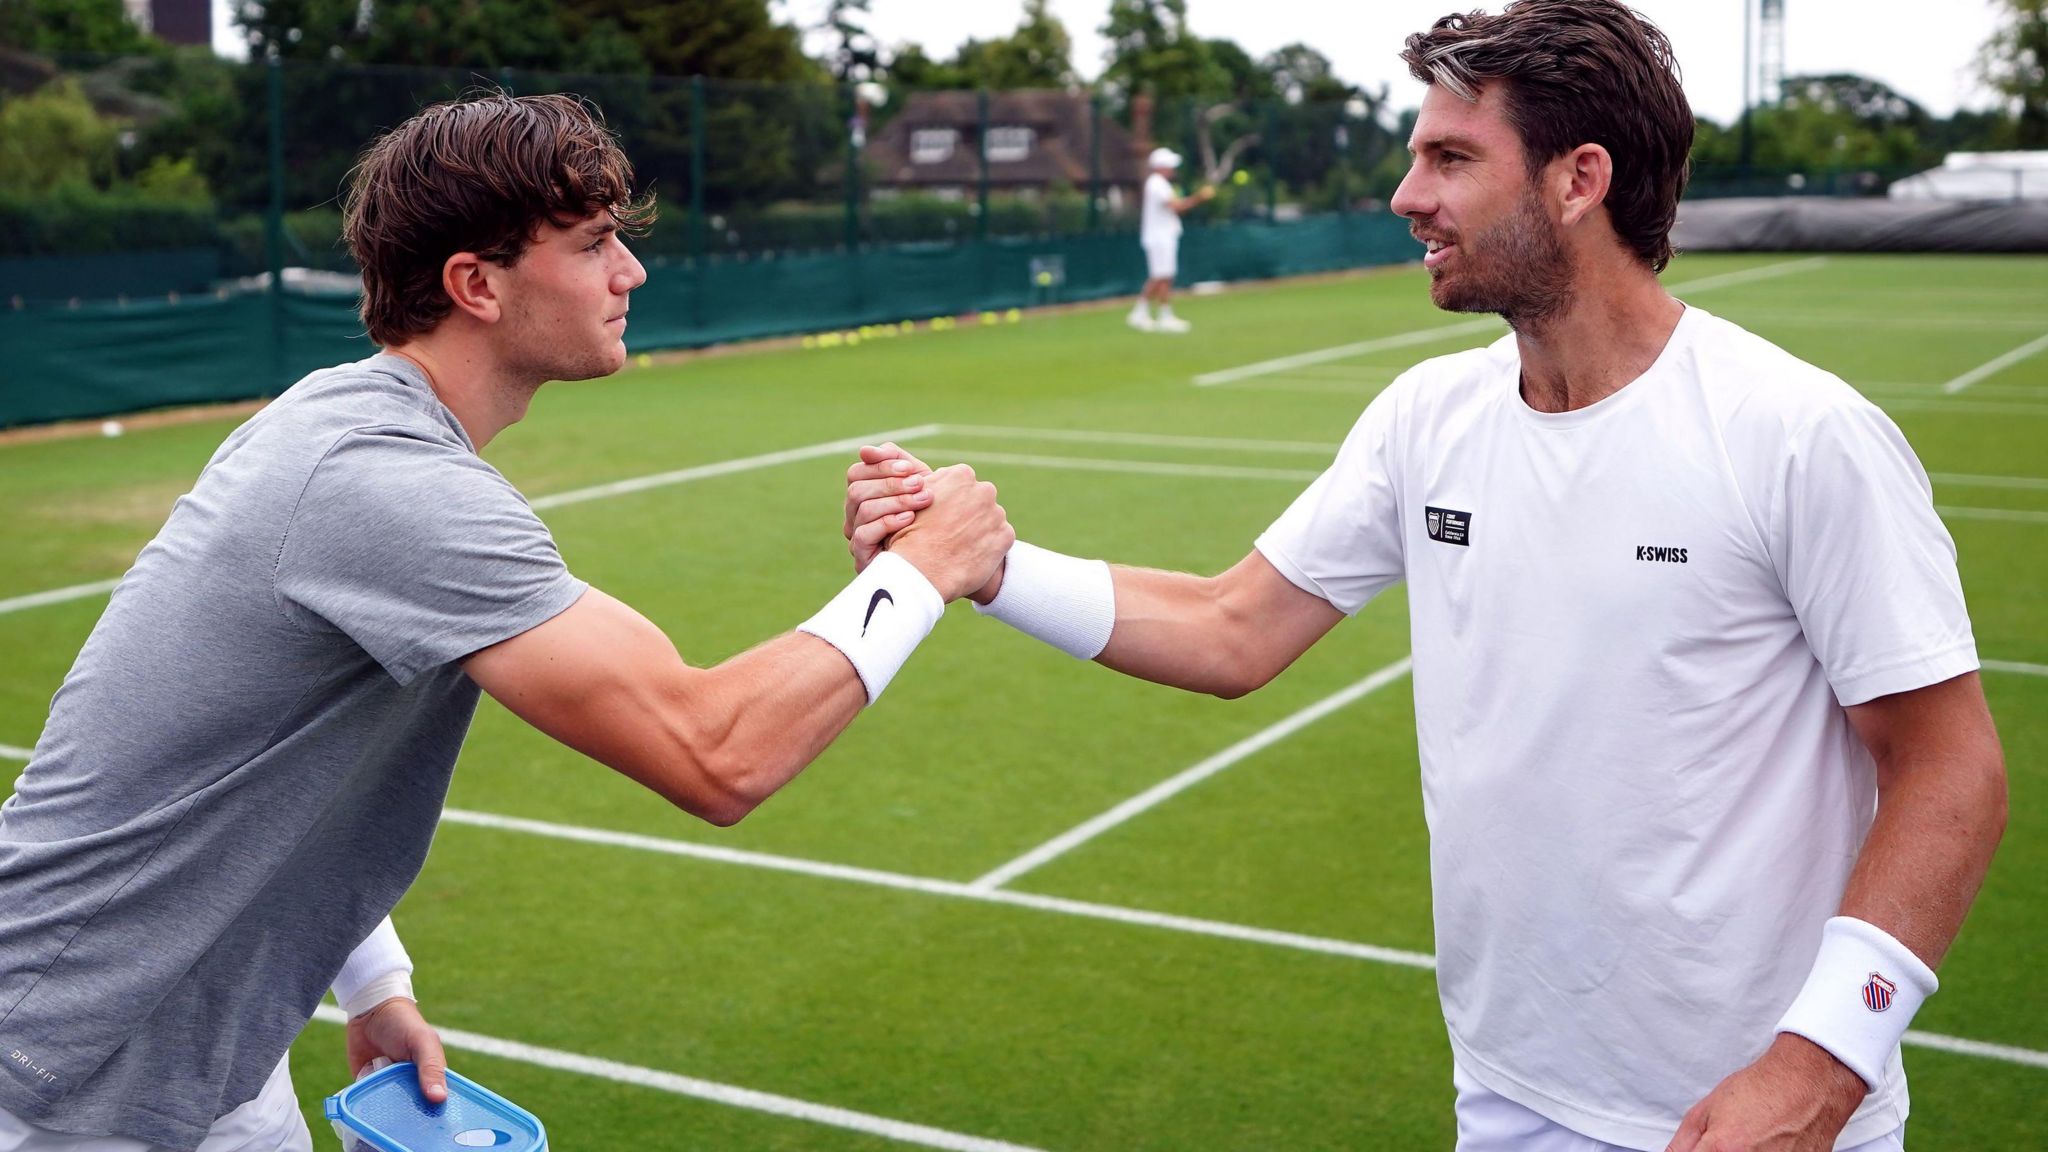 Jack Draper and Cameron Norrie clasp hands as they greet each other at Wimbledon